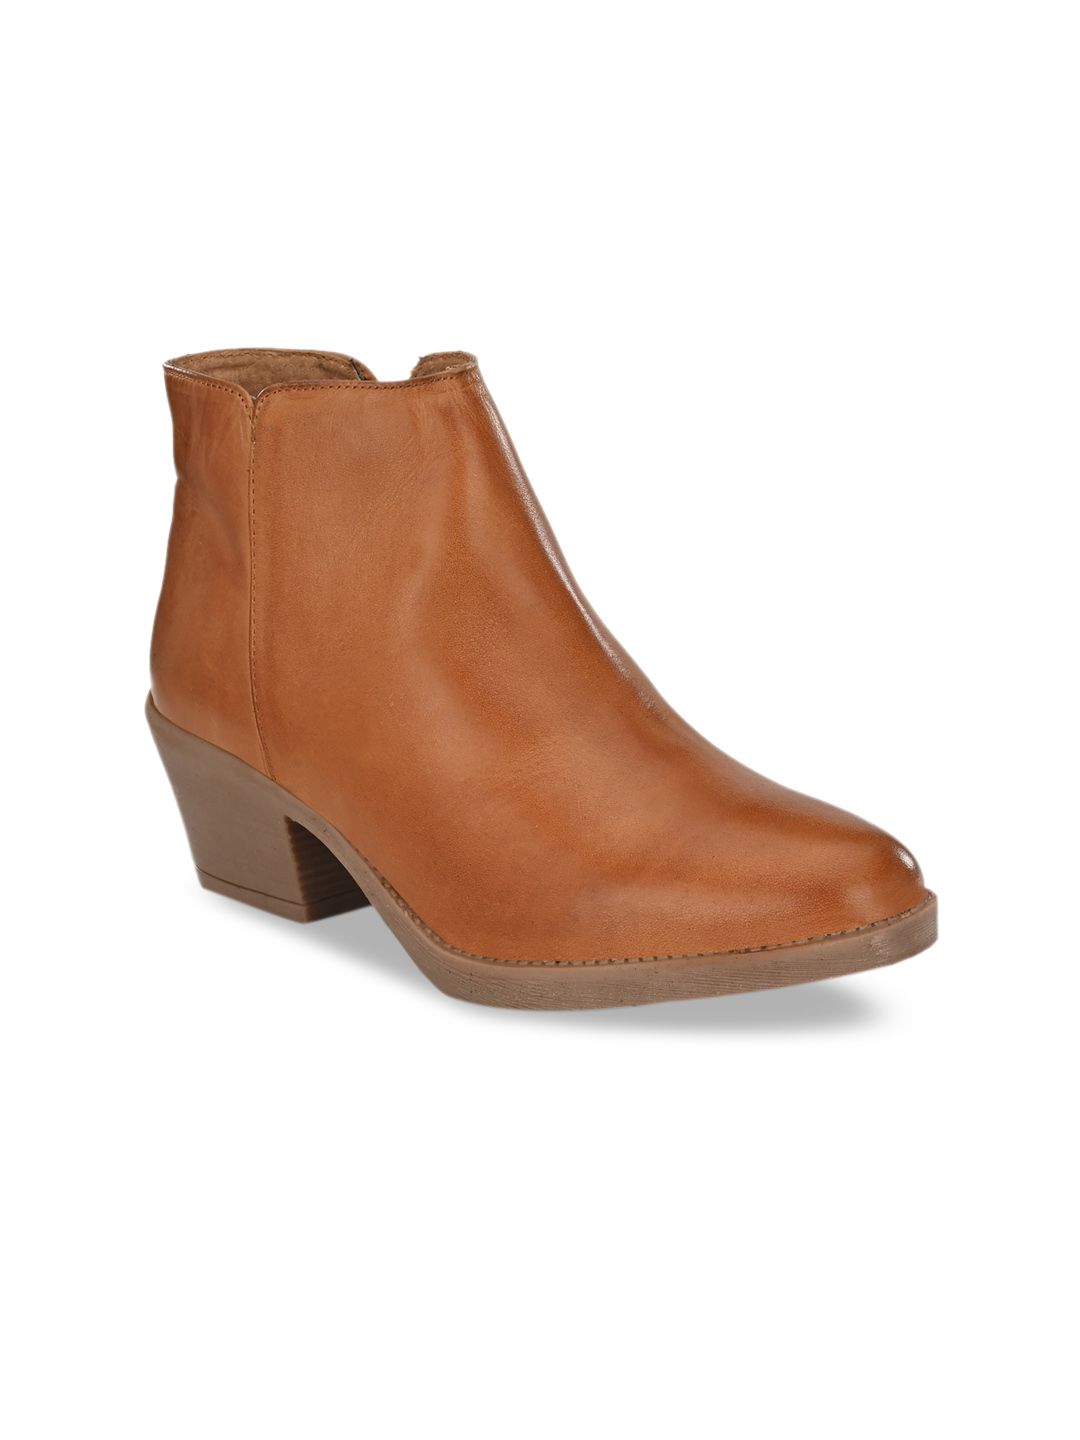 CARLO ROMANO Women Tan Brown Solid Mid-Top Leather Heeled Boots Price in India